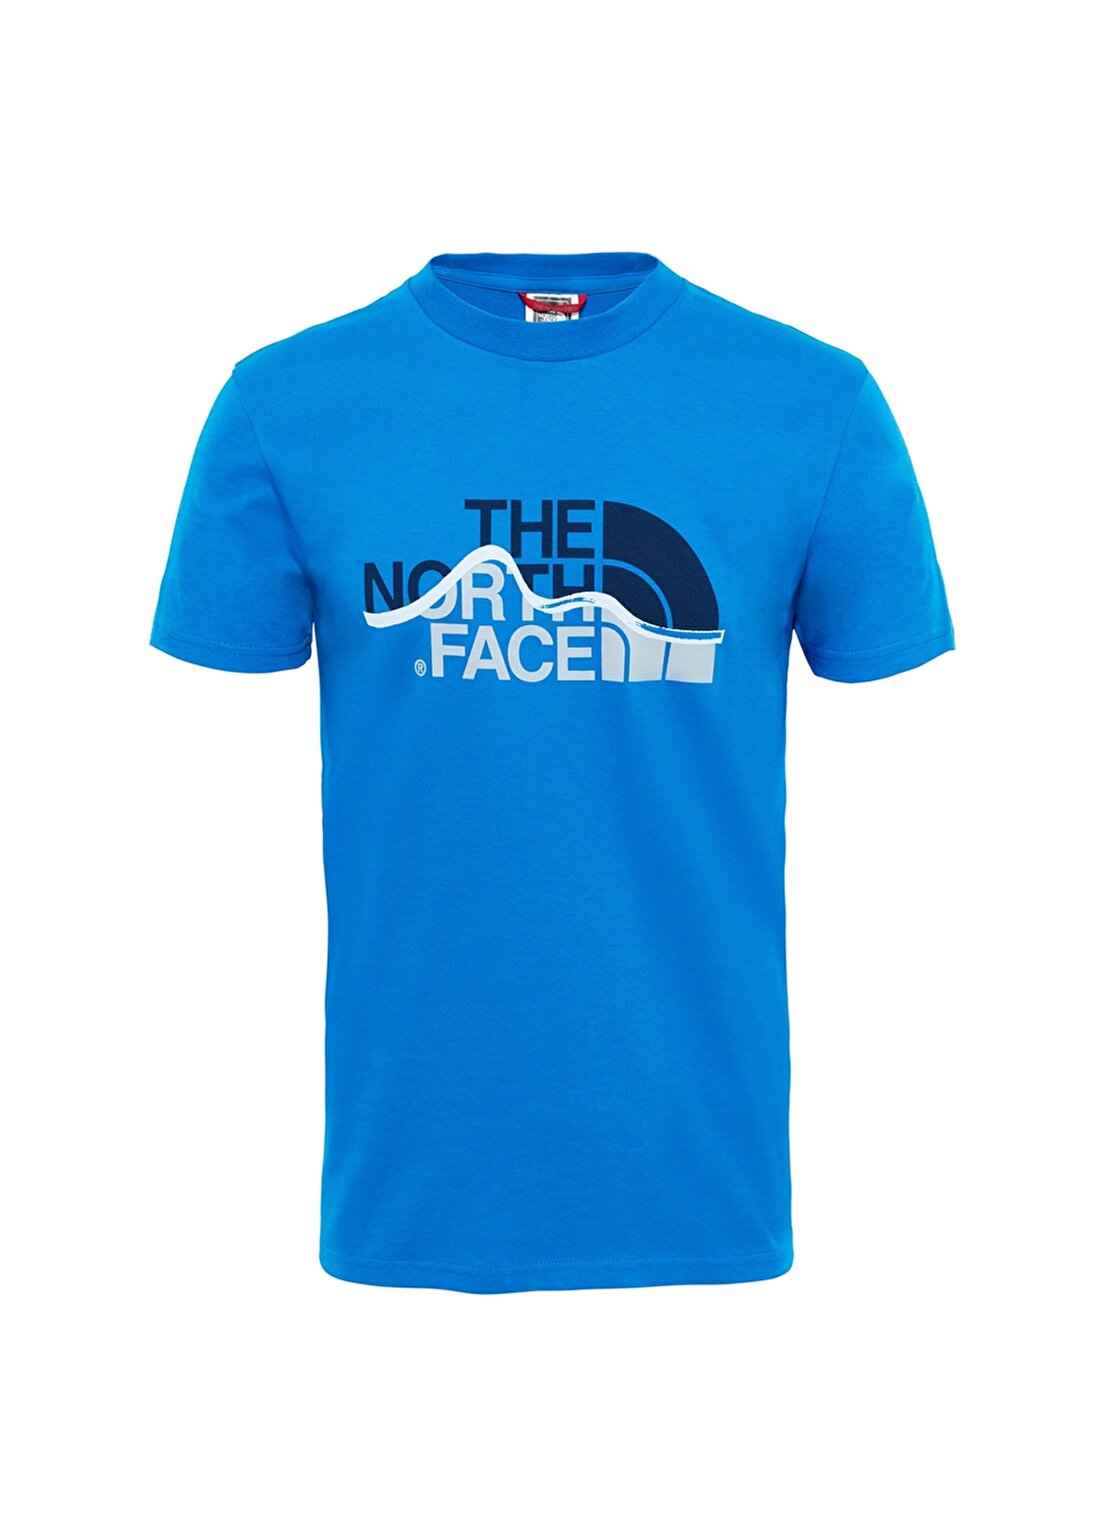 The North Face T0A3G2F89 Mount Line Tee T-Shirt